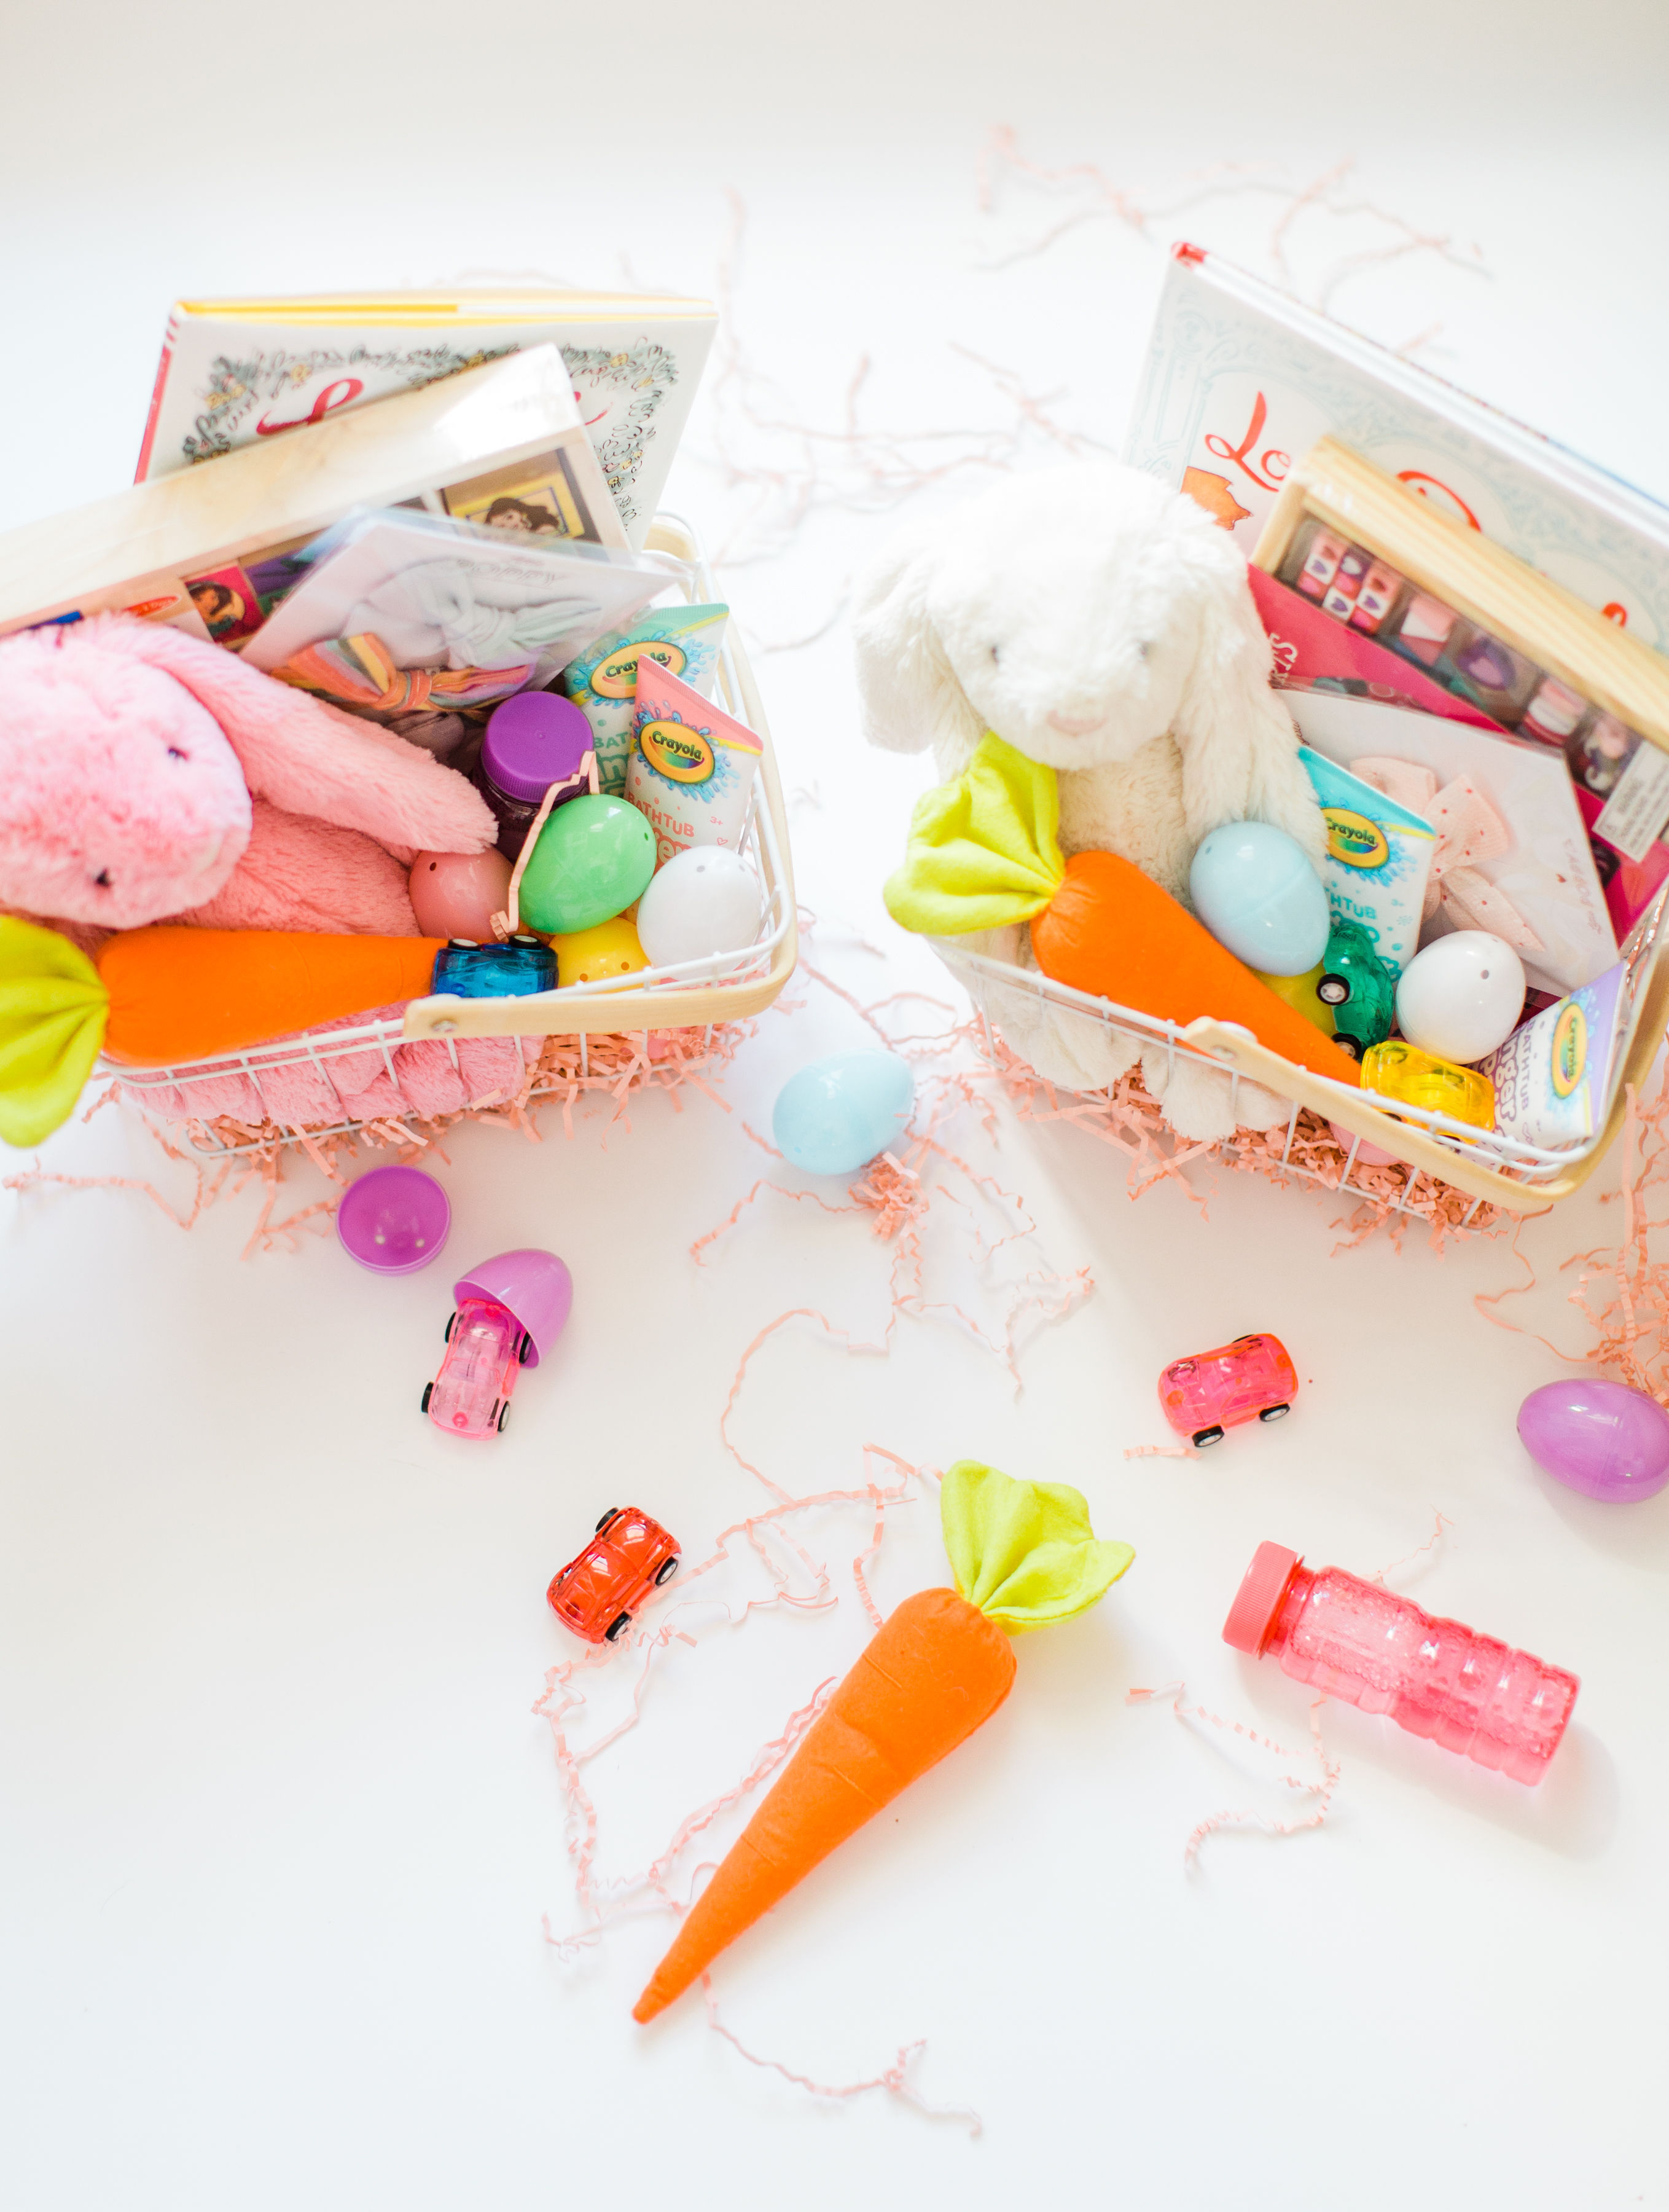 Here's exactly what we put in our little girls' Easter baskets this year.